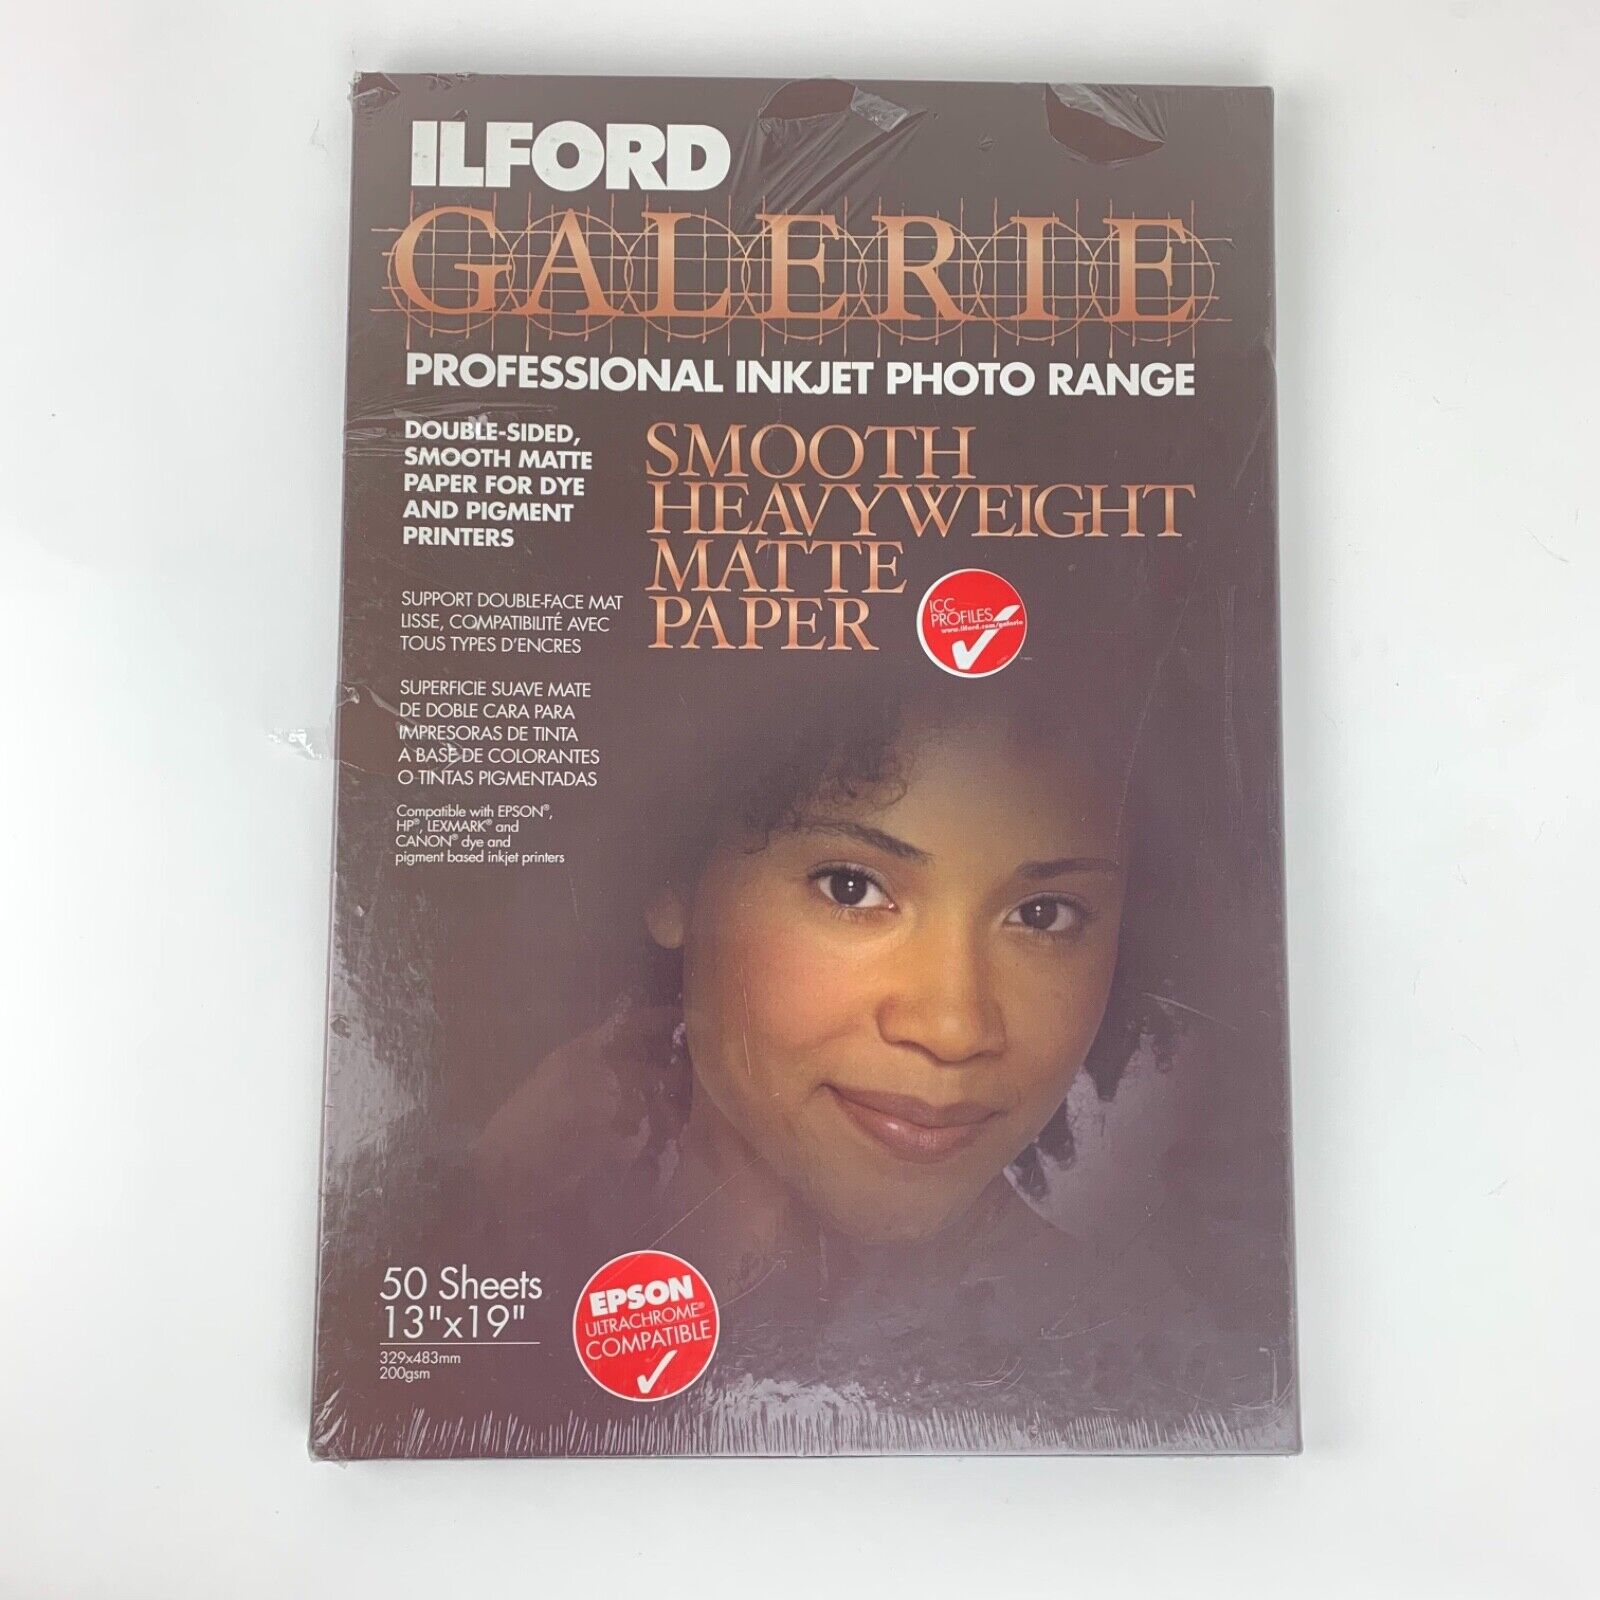 Ilford Galerie Smooth Heavyweight Matte Paper 13x19 50 Sheets NEW